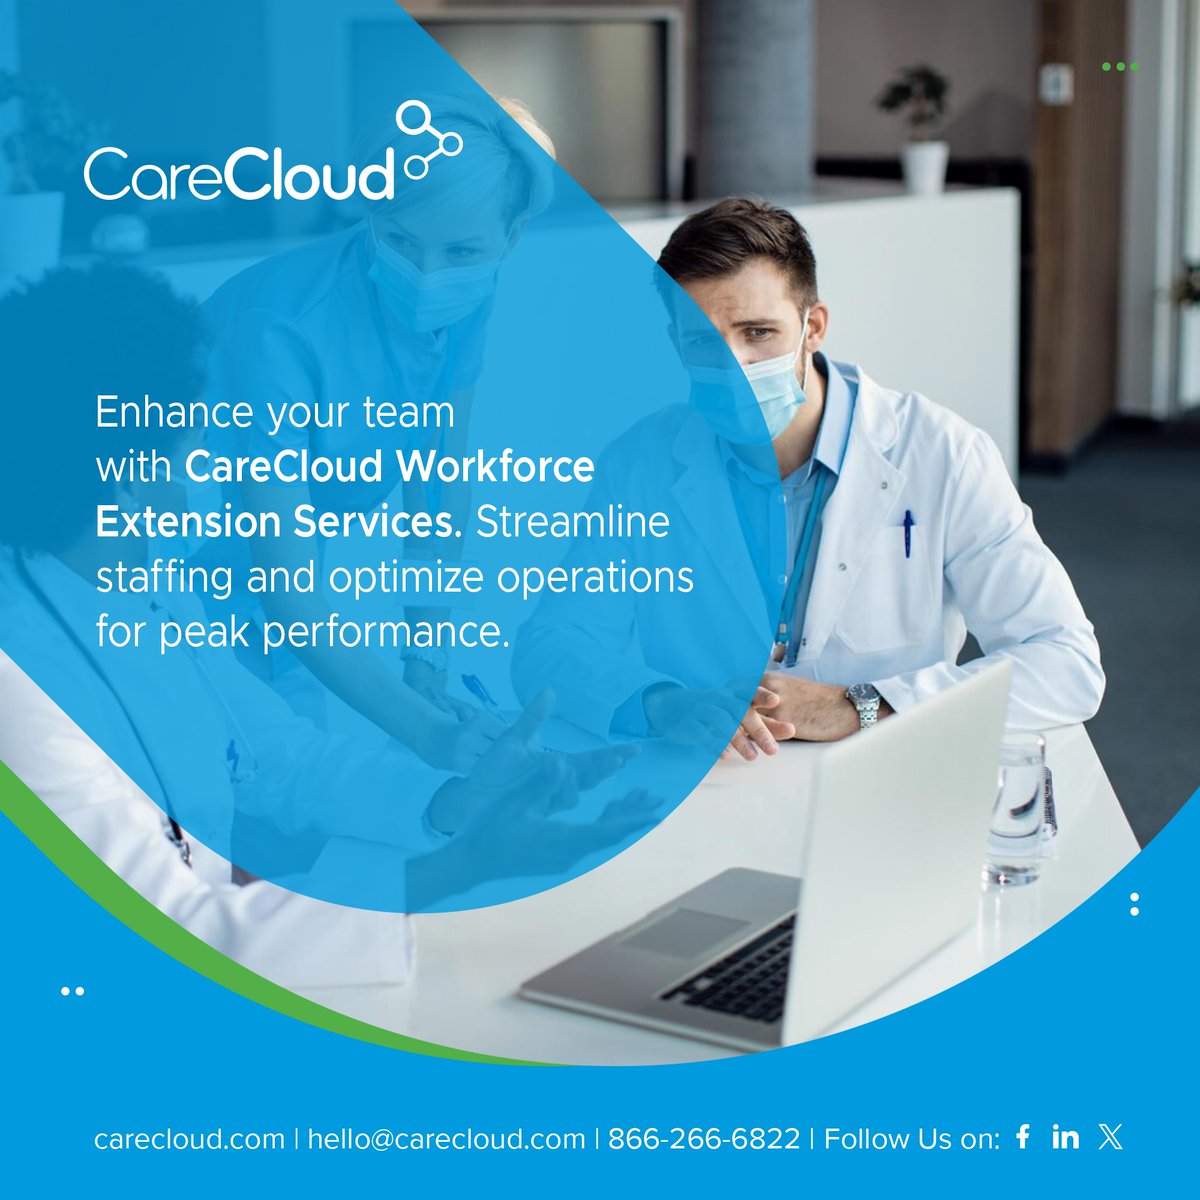 Handle healthcare staffing issues with CareCloud Workforce Extension Services. Seamlessly augment your team to meet demand and optimize operations. Learn more: bit.ly/3TyL8cD #WorkforceExtension #HealthcareStaffing #Healthcare #medicalbilling #CareCloud #RCM #EHR